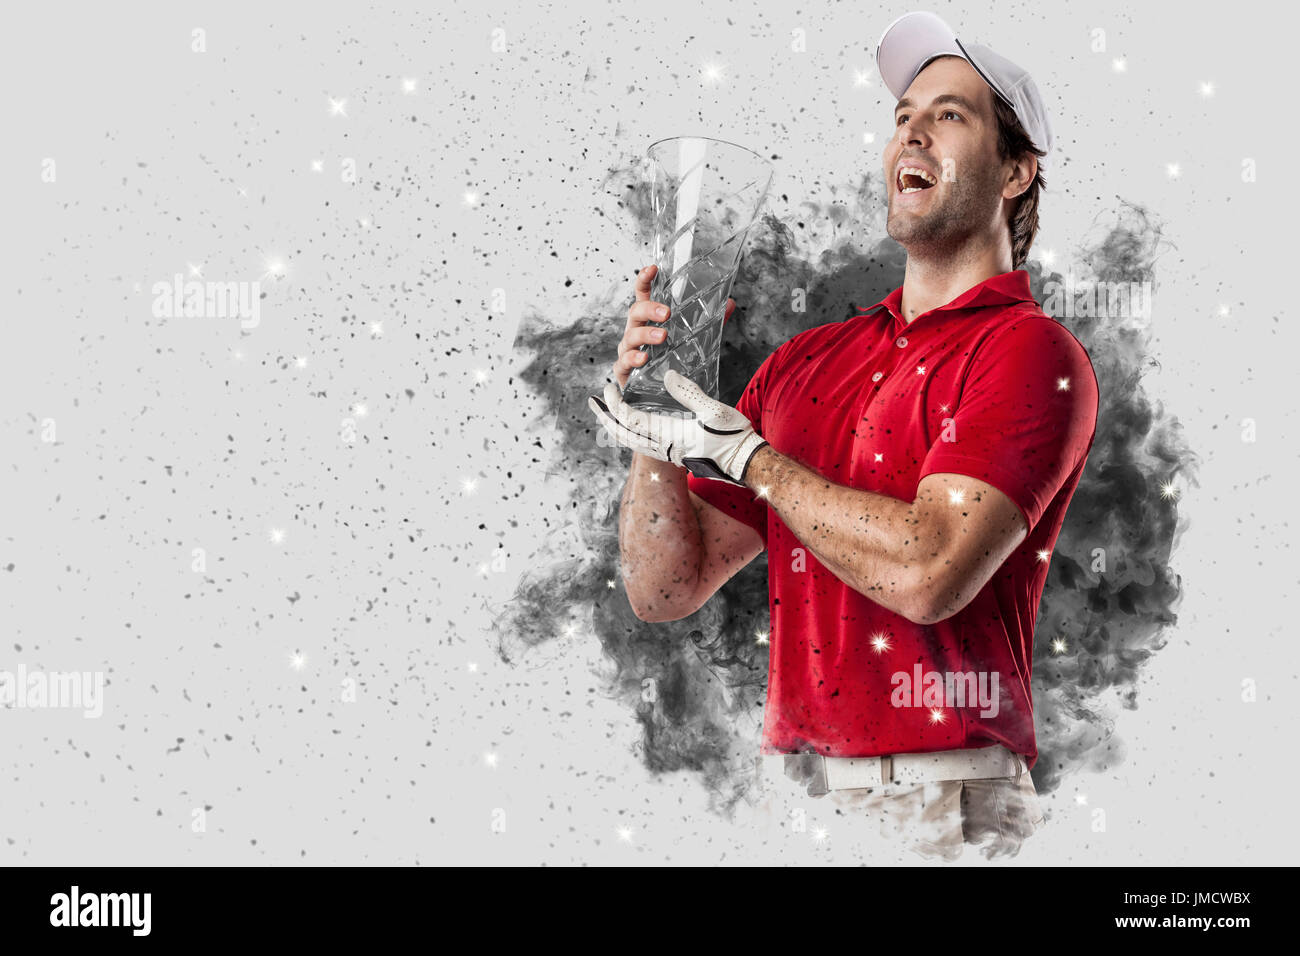 Golf Player with a red uniform coming out of a blast of smoke . Stock Photo